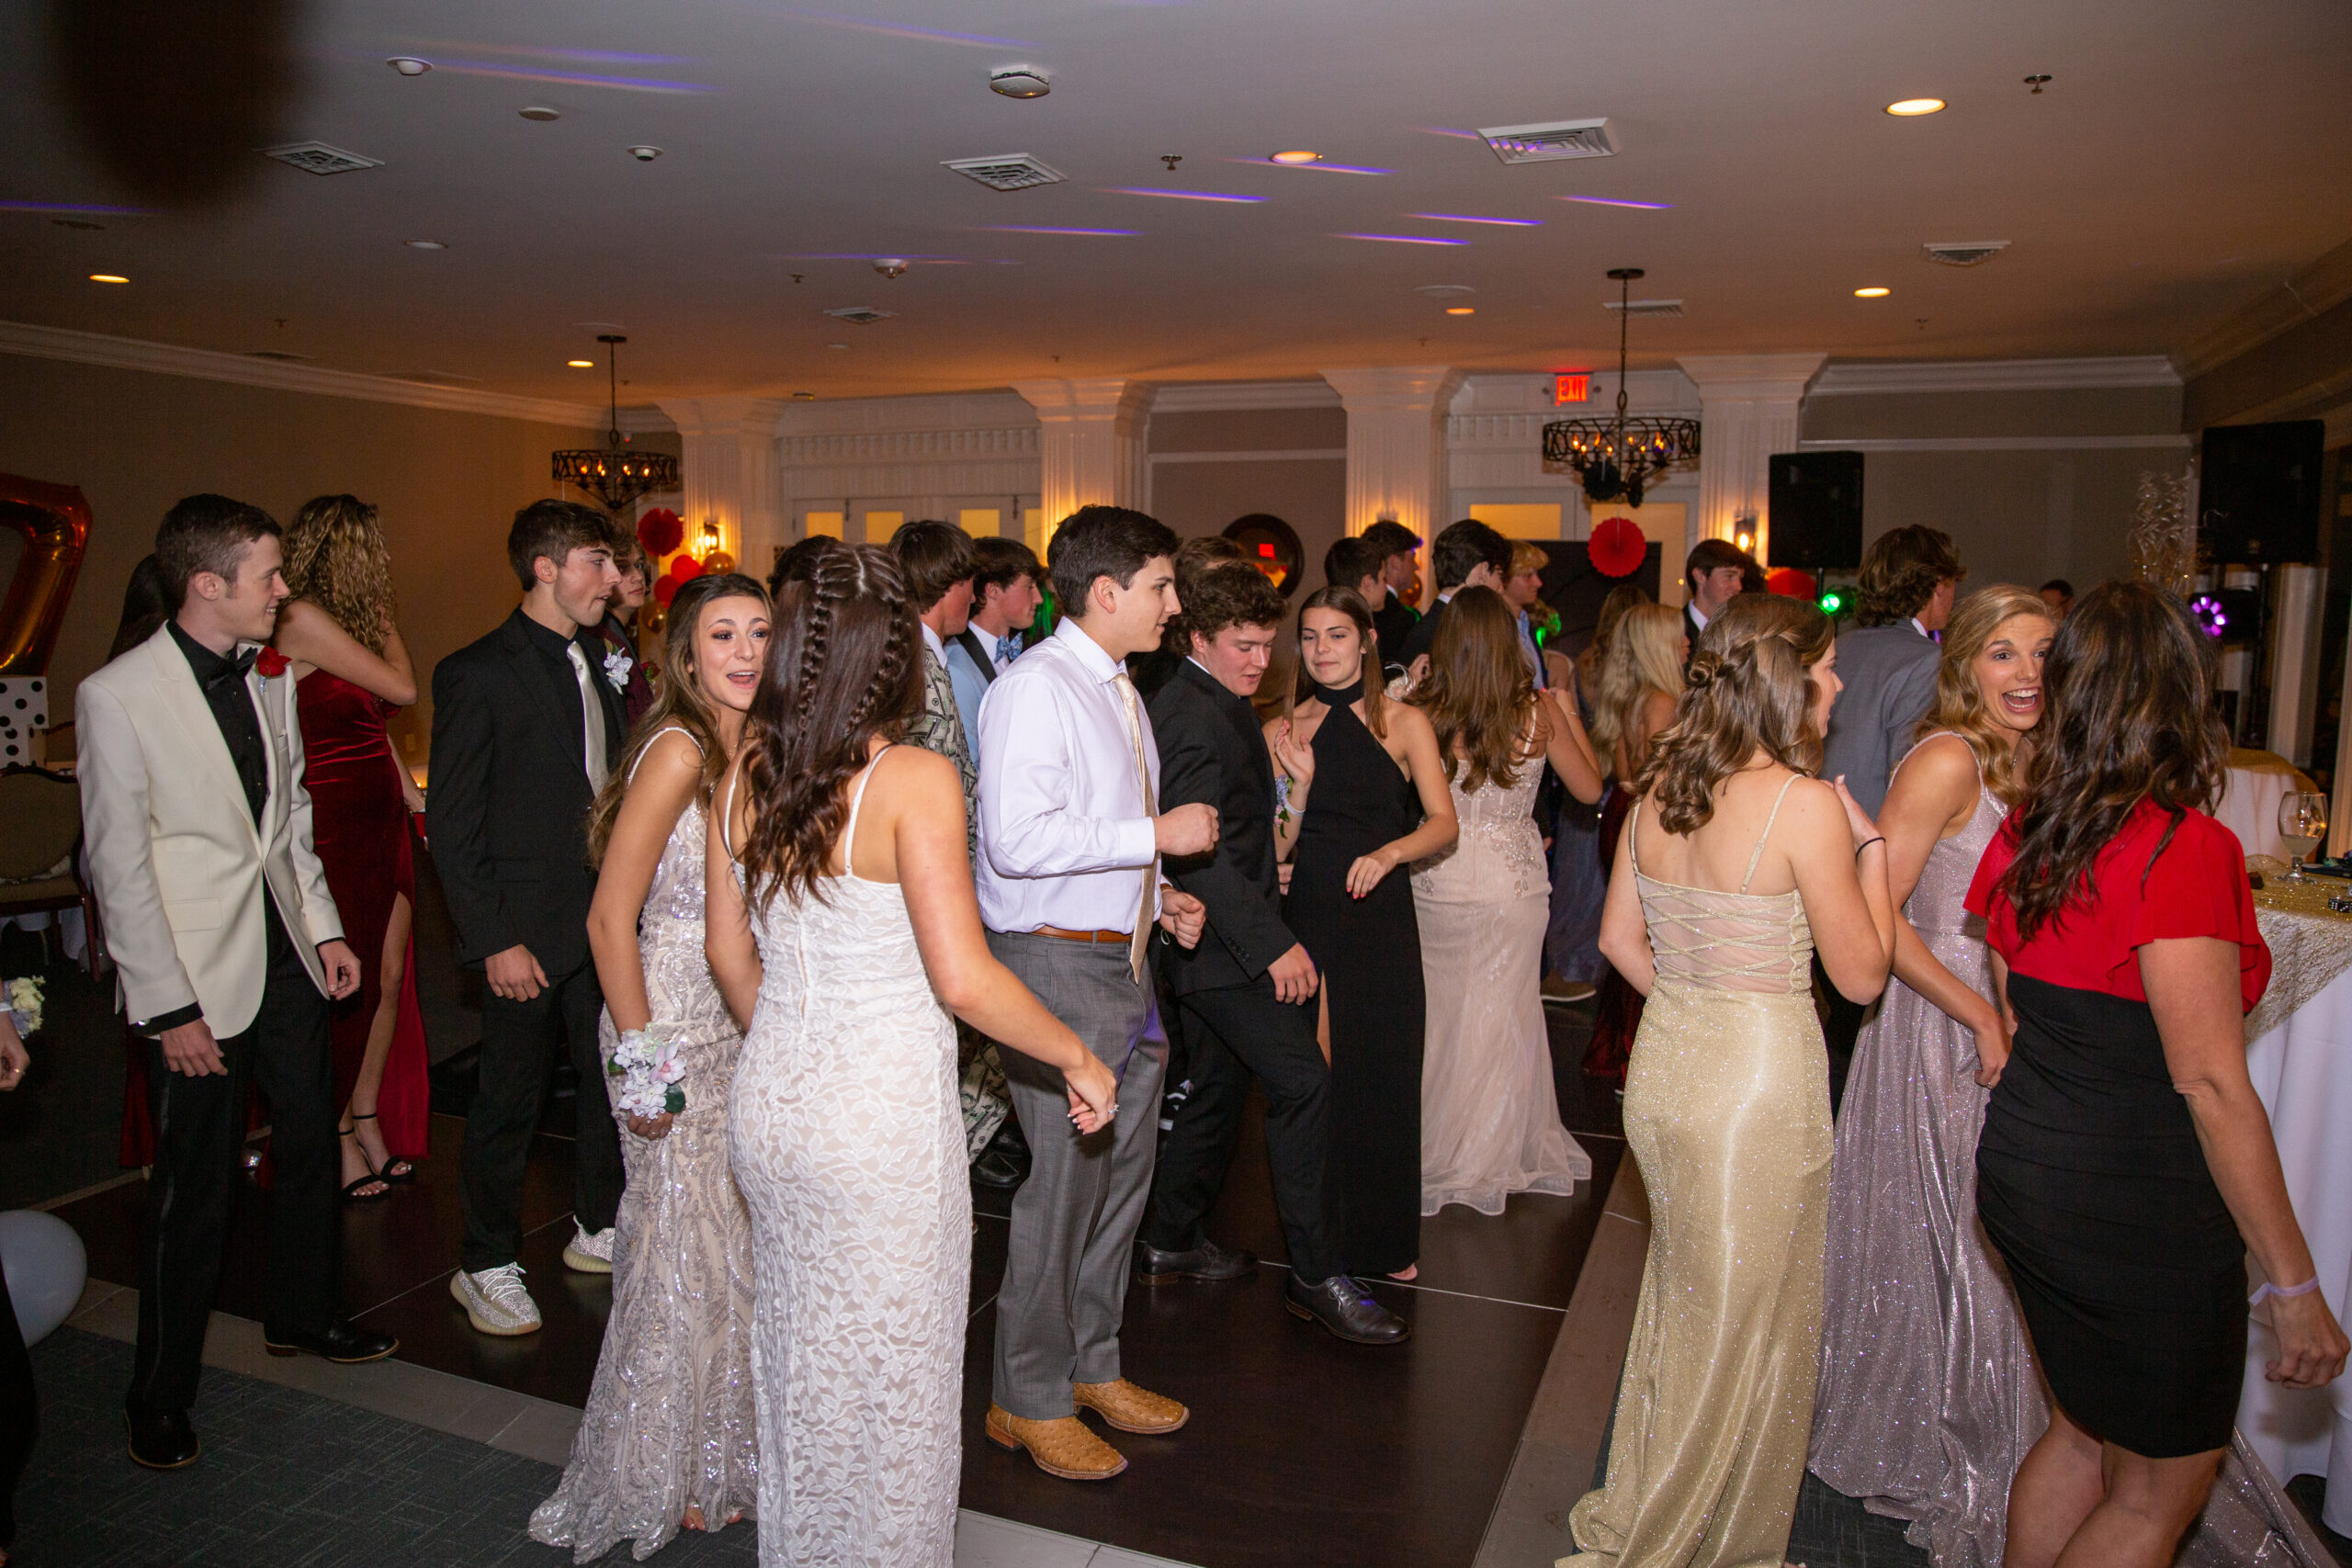 students dancing at Prom